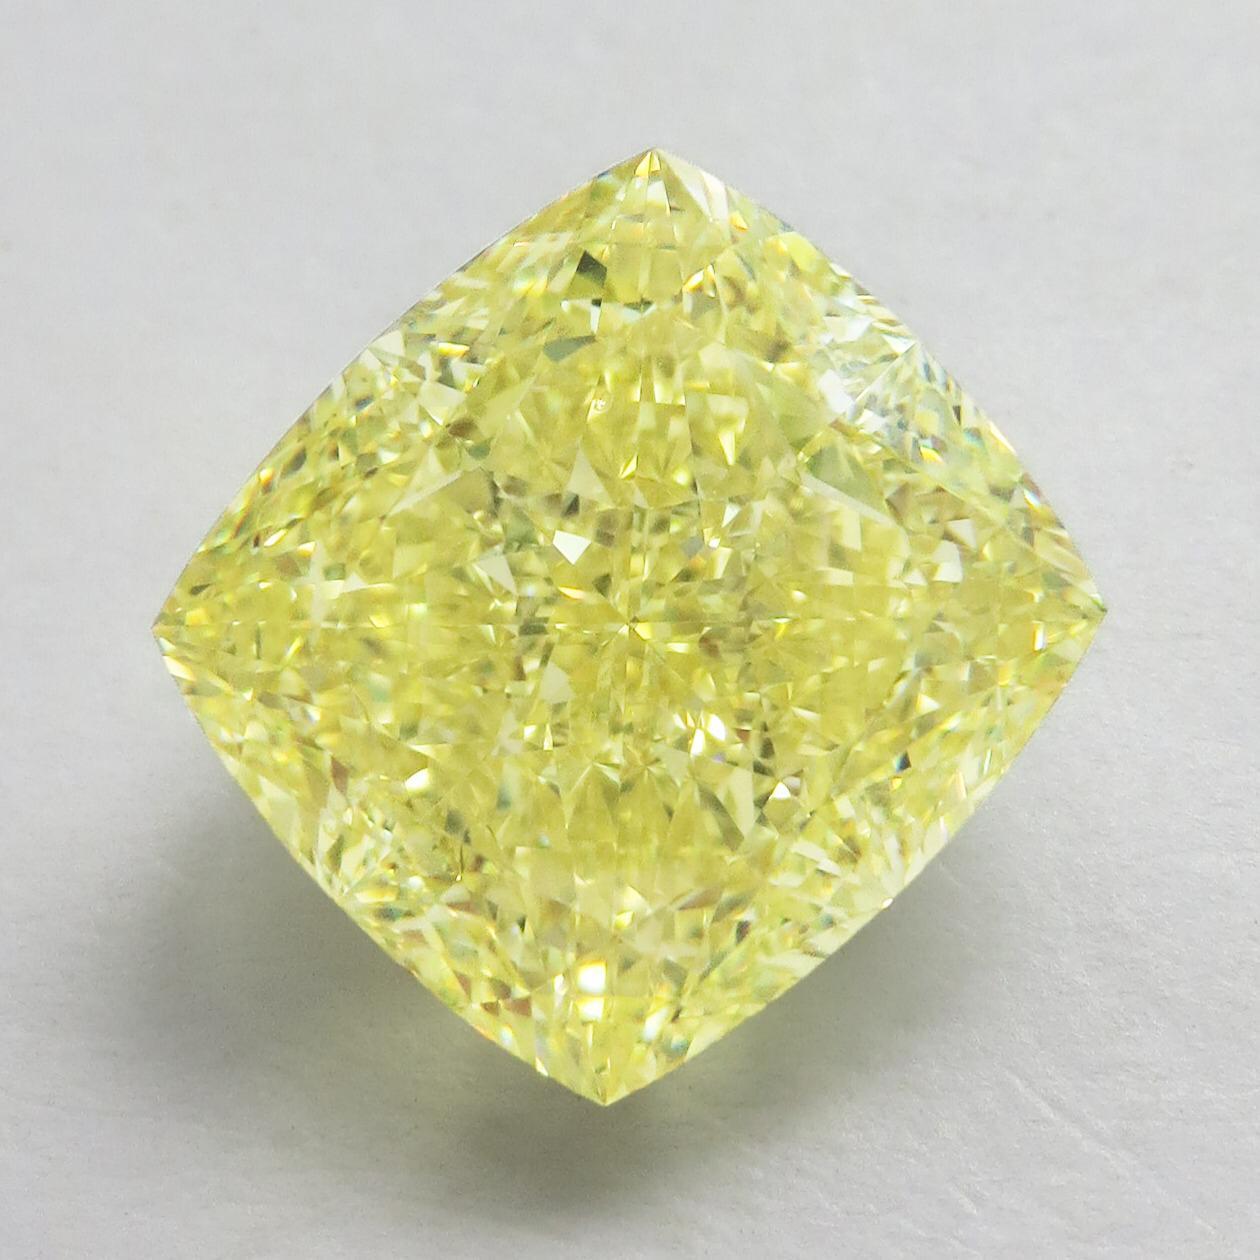 From the Emilio Jewelry Vault, Showcasing a magnificent investment grade 15.00 carat Gia certified natural fancy yellow diamond. 
We are experts at creating jewels for these very special collectible pieces, and we would be happy to create your dream